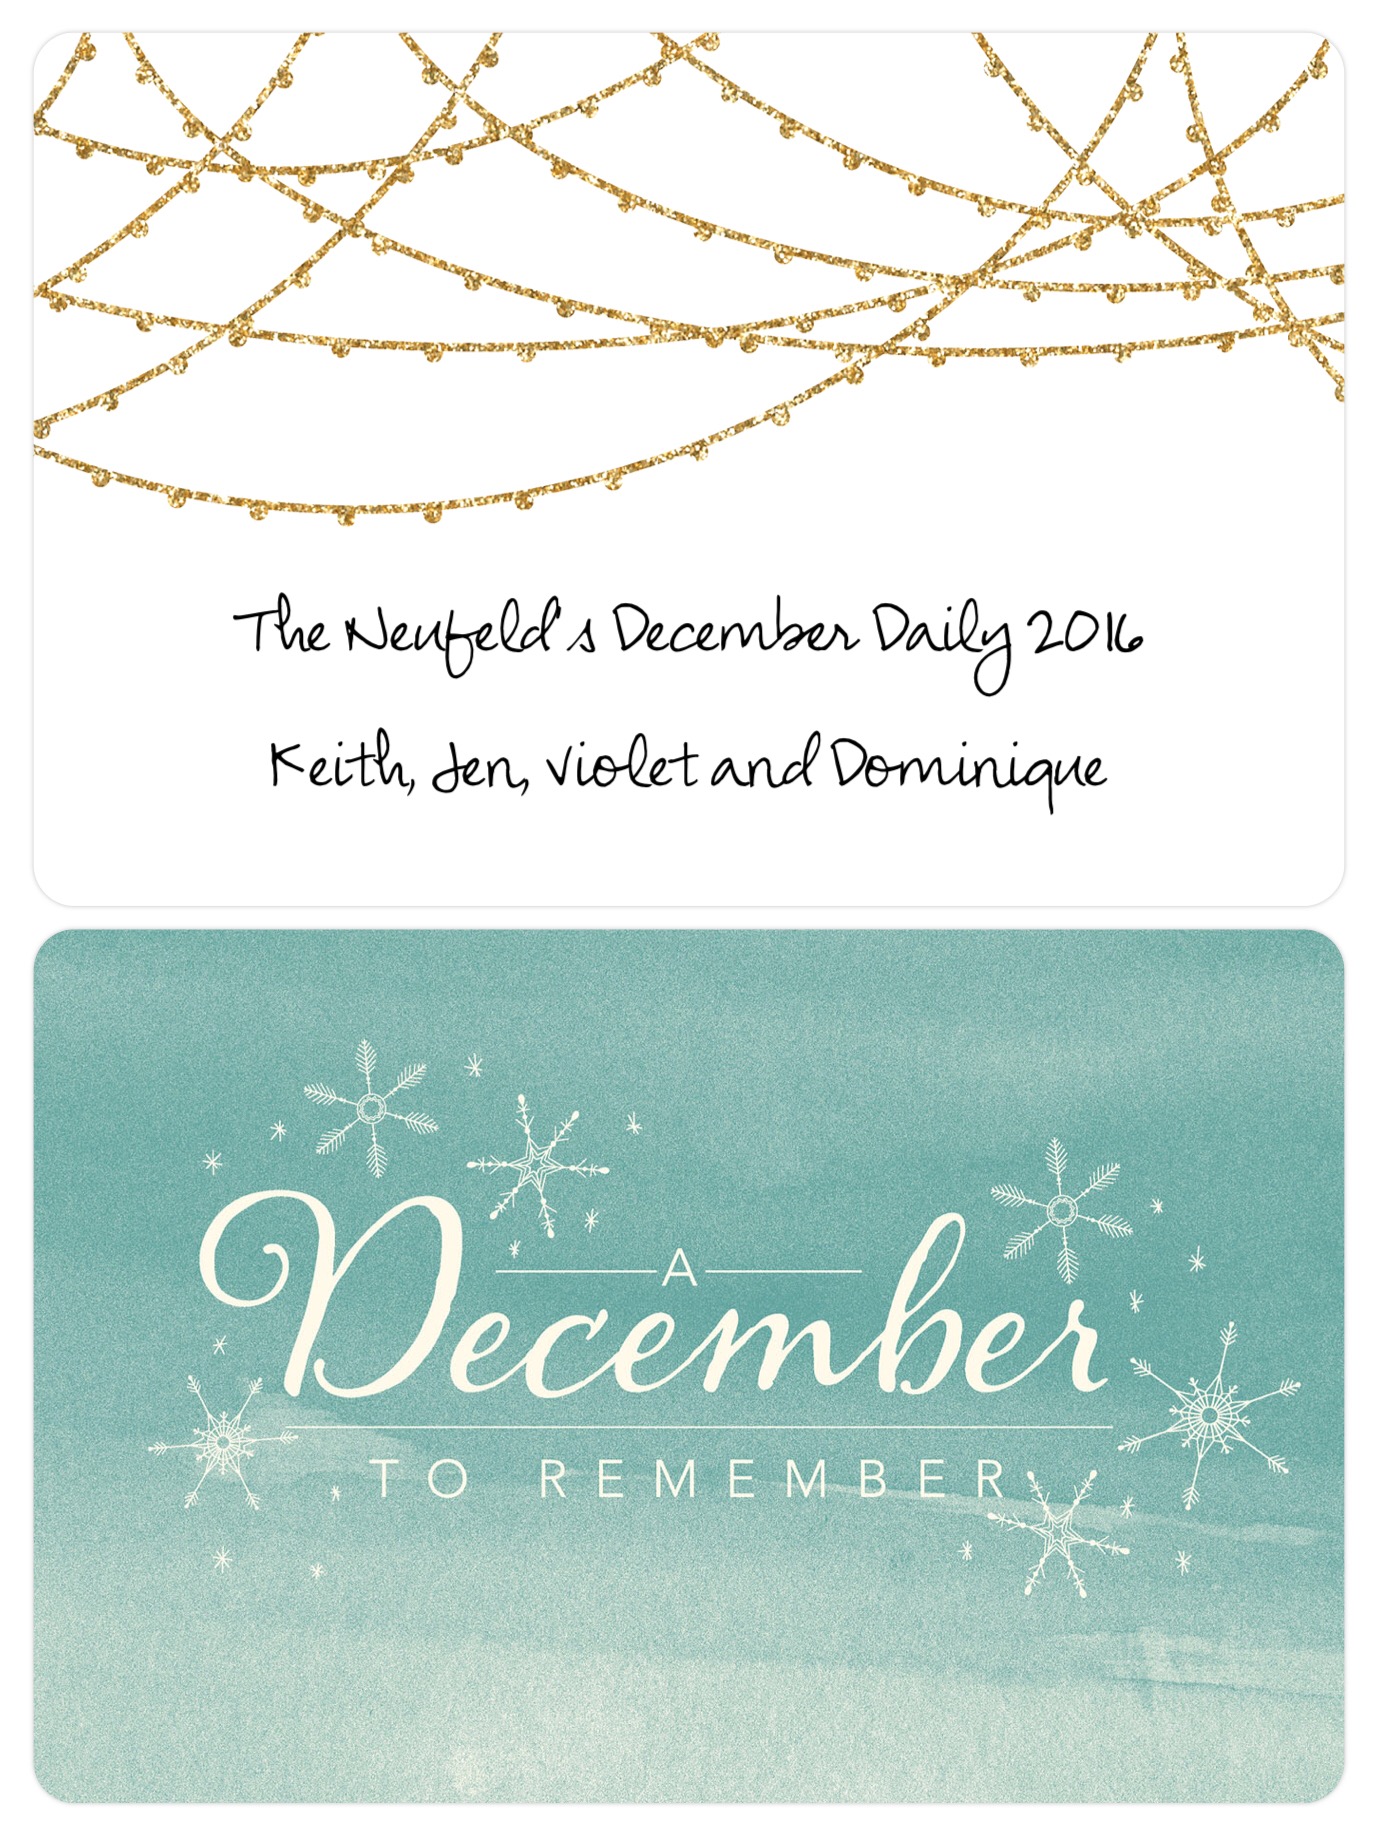 2016-december-daily-title-page